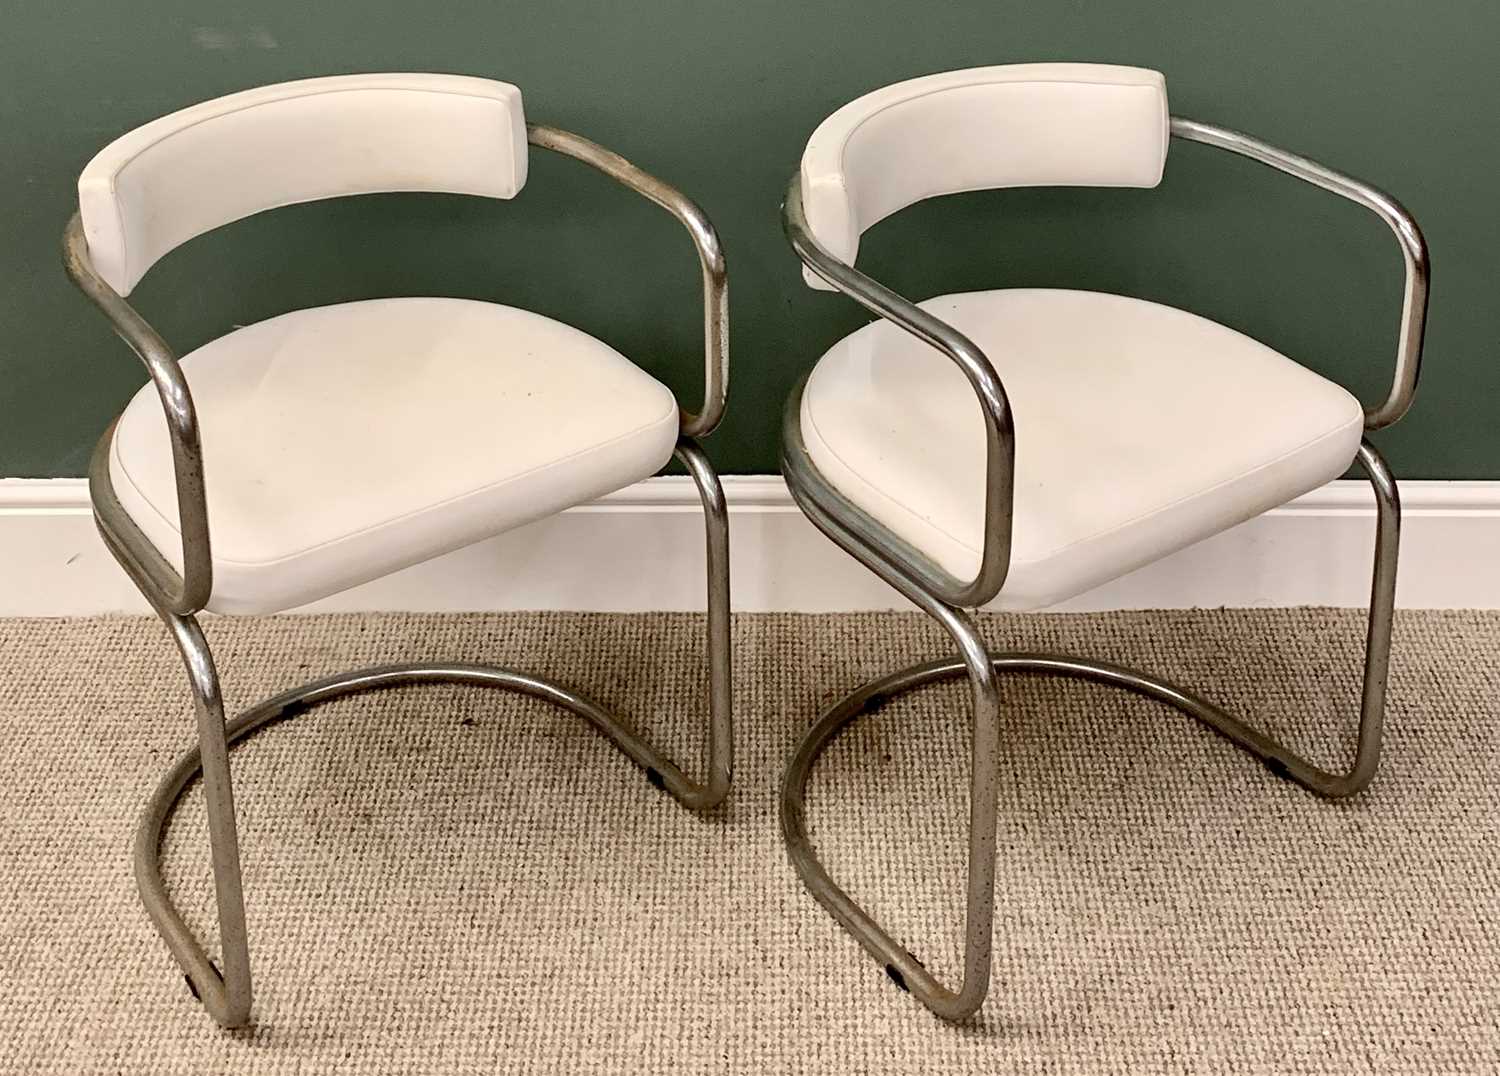 RETRO TUB TYPE DINING CHAIRS - set of four with vinyl seats and backs within chrome frames, 72cms H, - Image 3 of 3